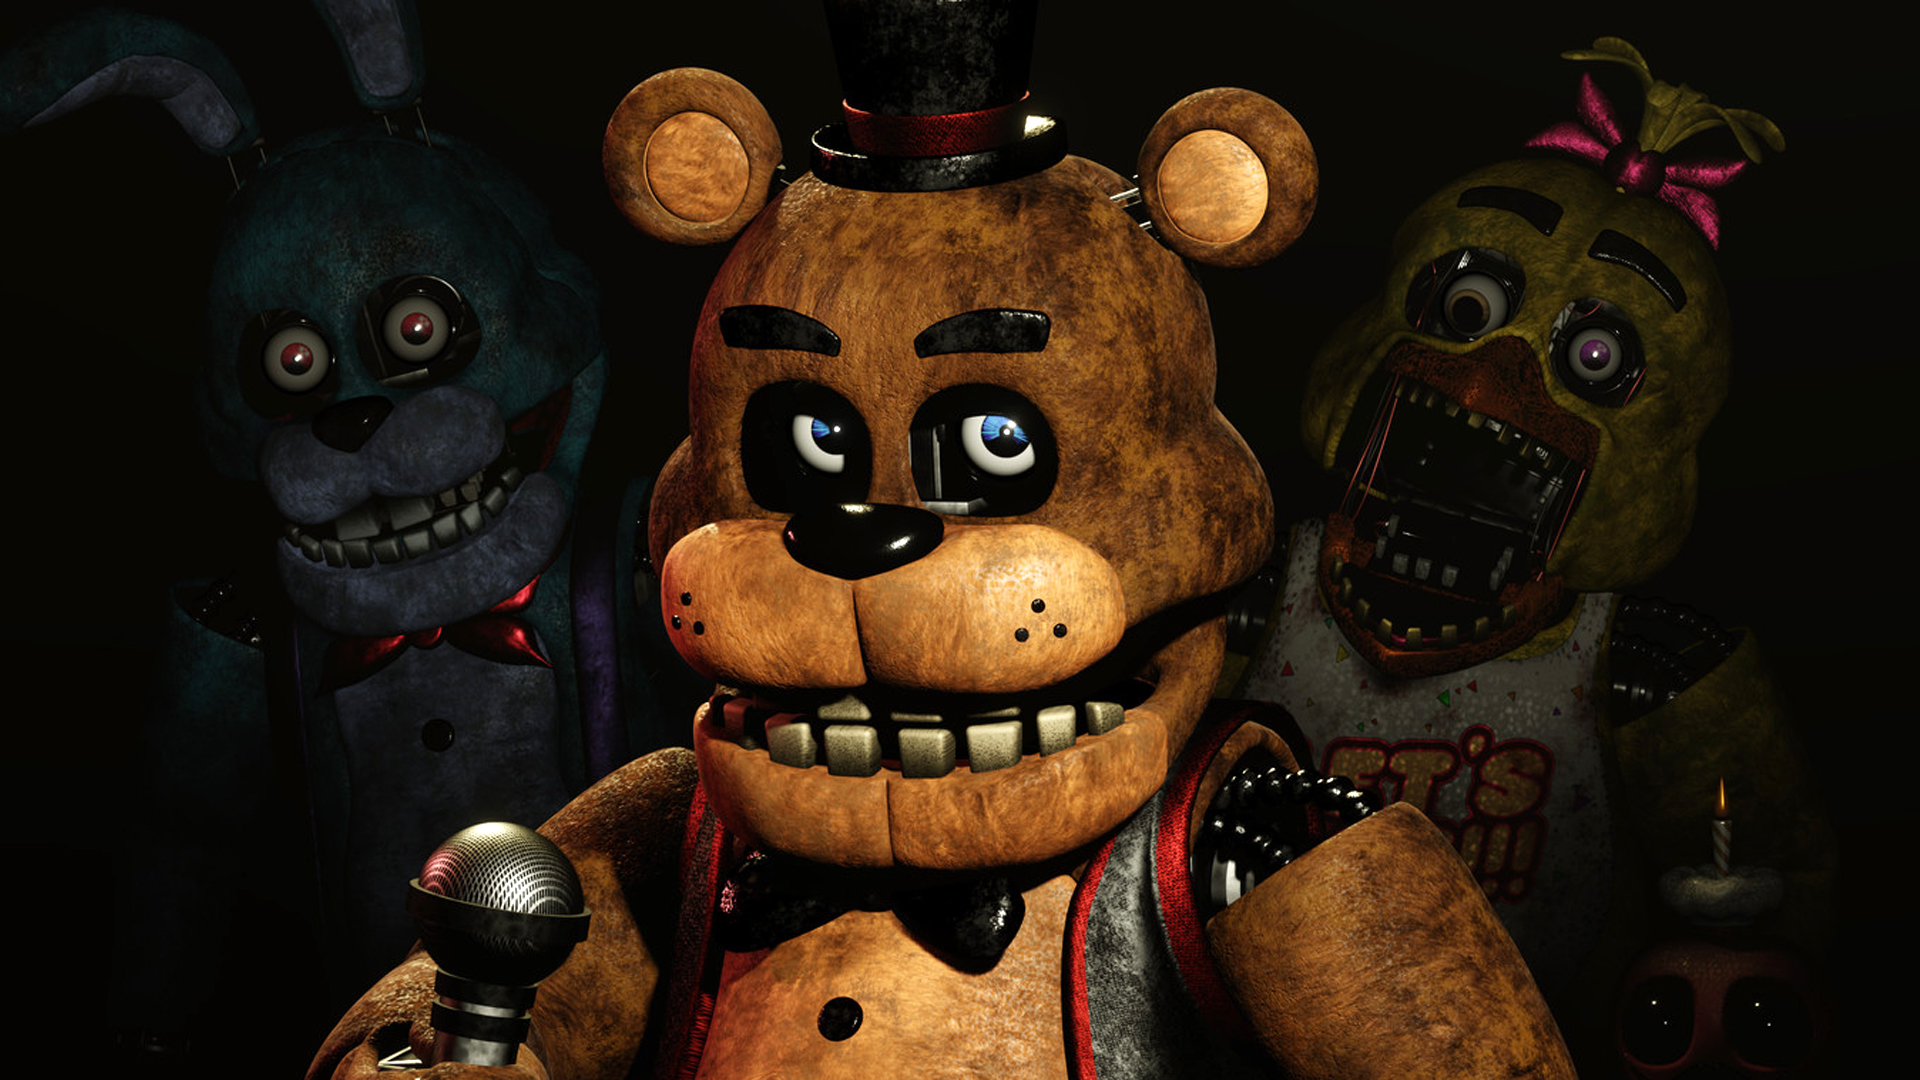 Five Nights At Freddy's - Trailer Oficial